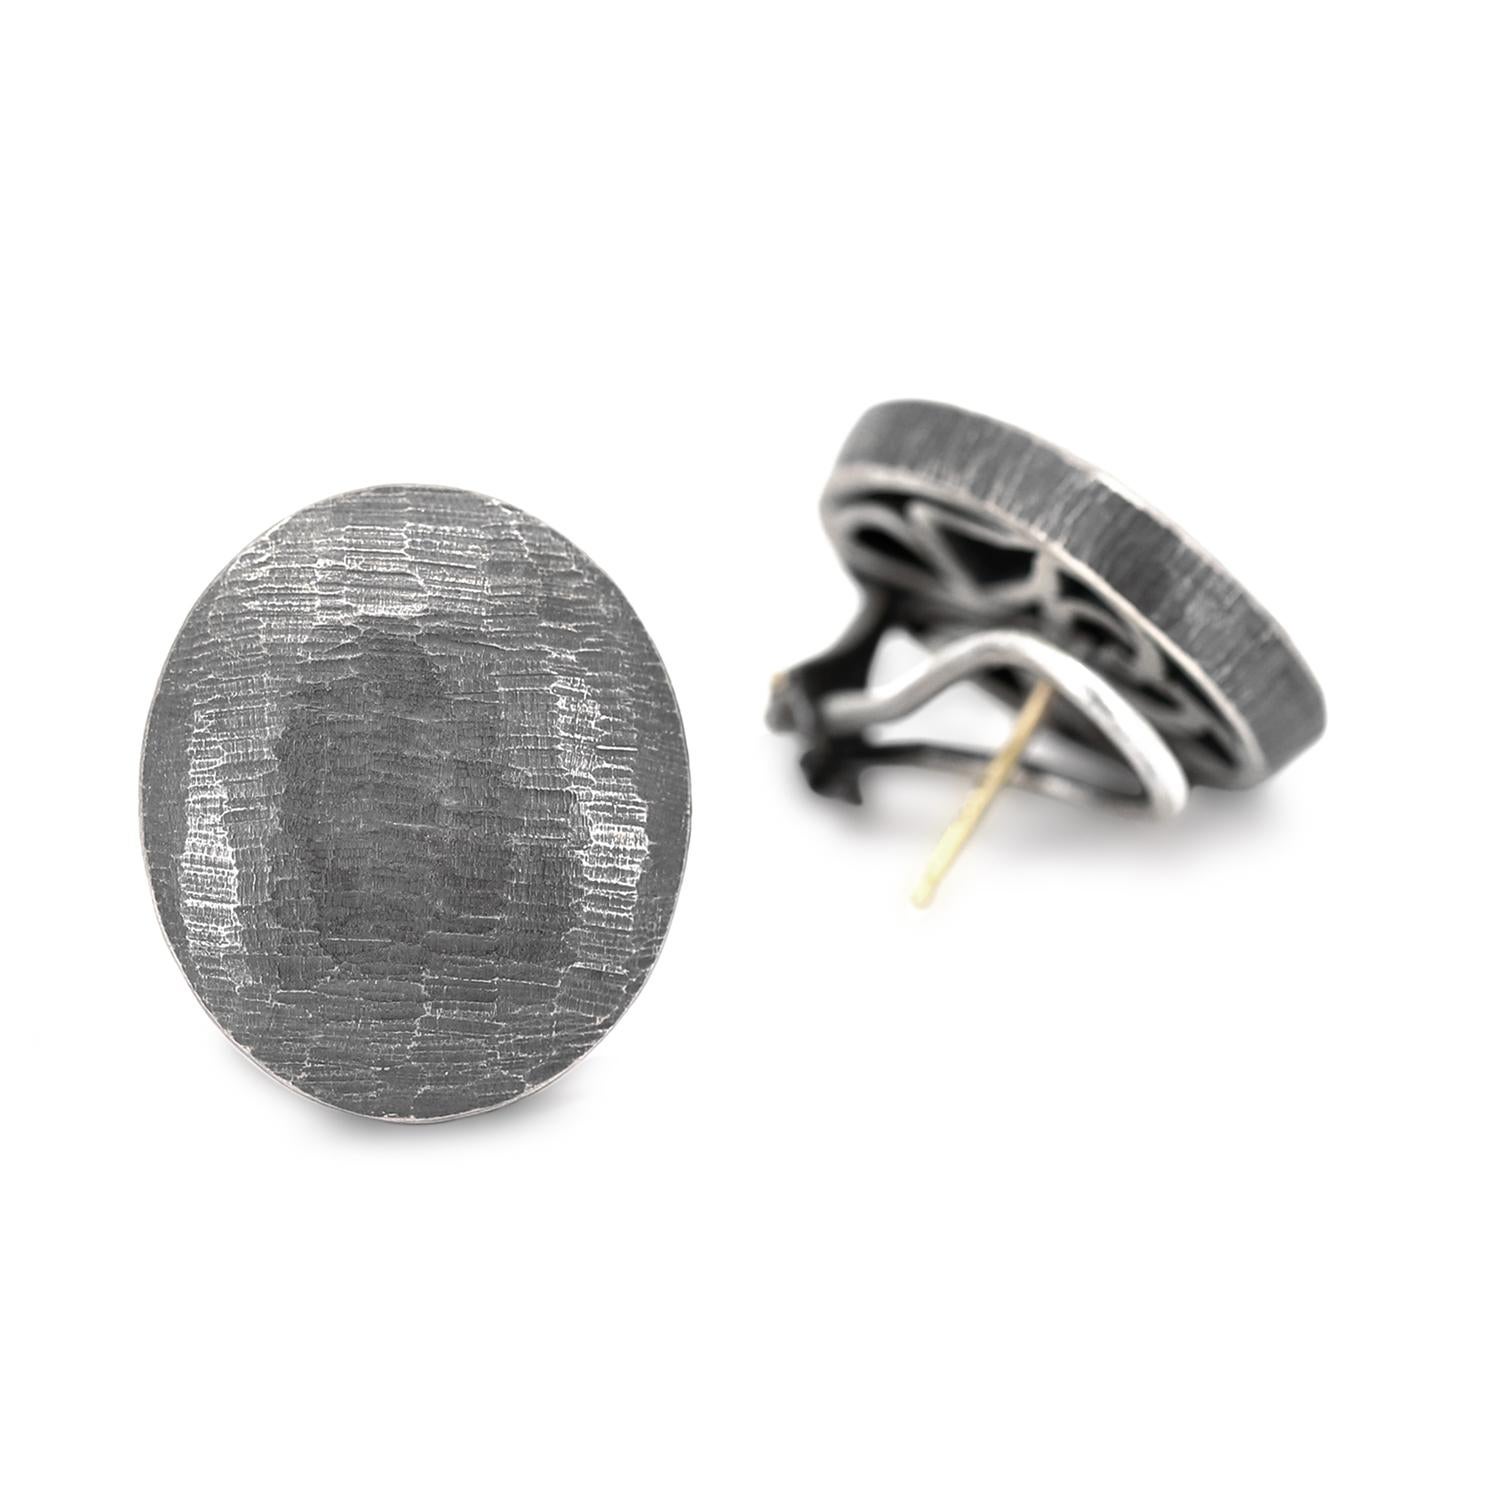 Large Oval Stud Earrings handcrafted by award winning jewelry maker John Iversen in finely-textured oxidized sterling silver with post and clip backs. Posts easily removed upon request. Stamped and Hallmarked.

About the Maker - John Iversen has had